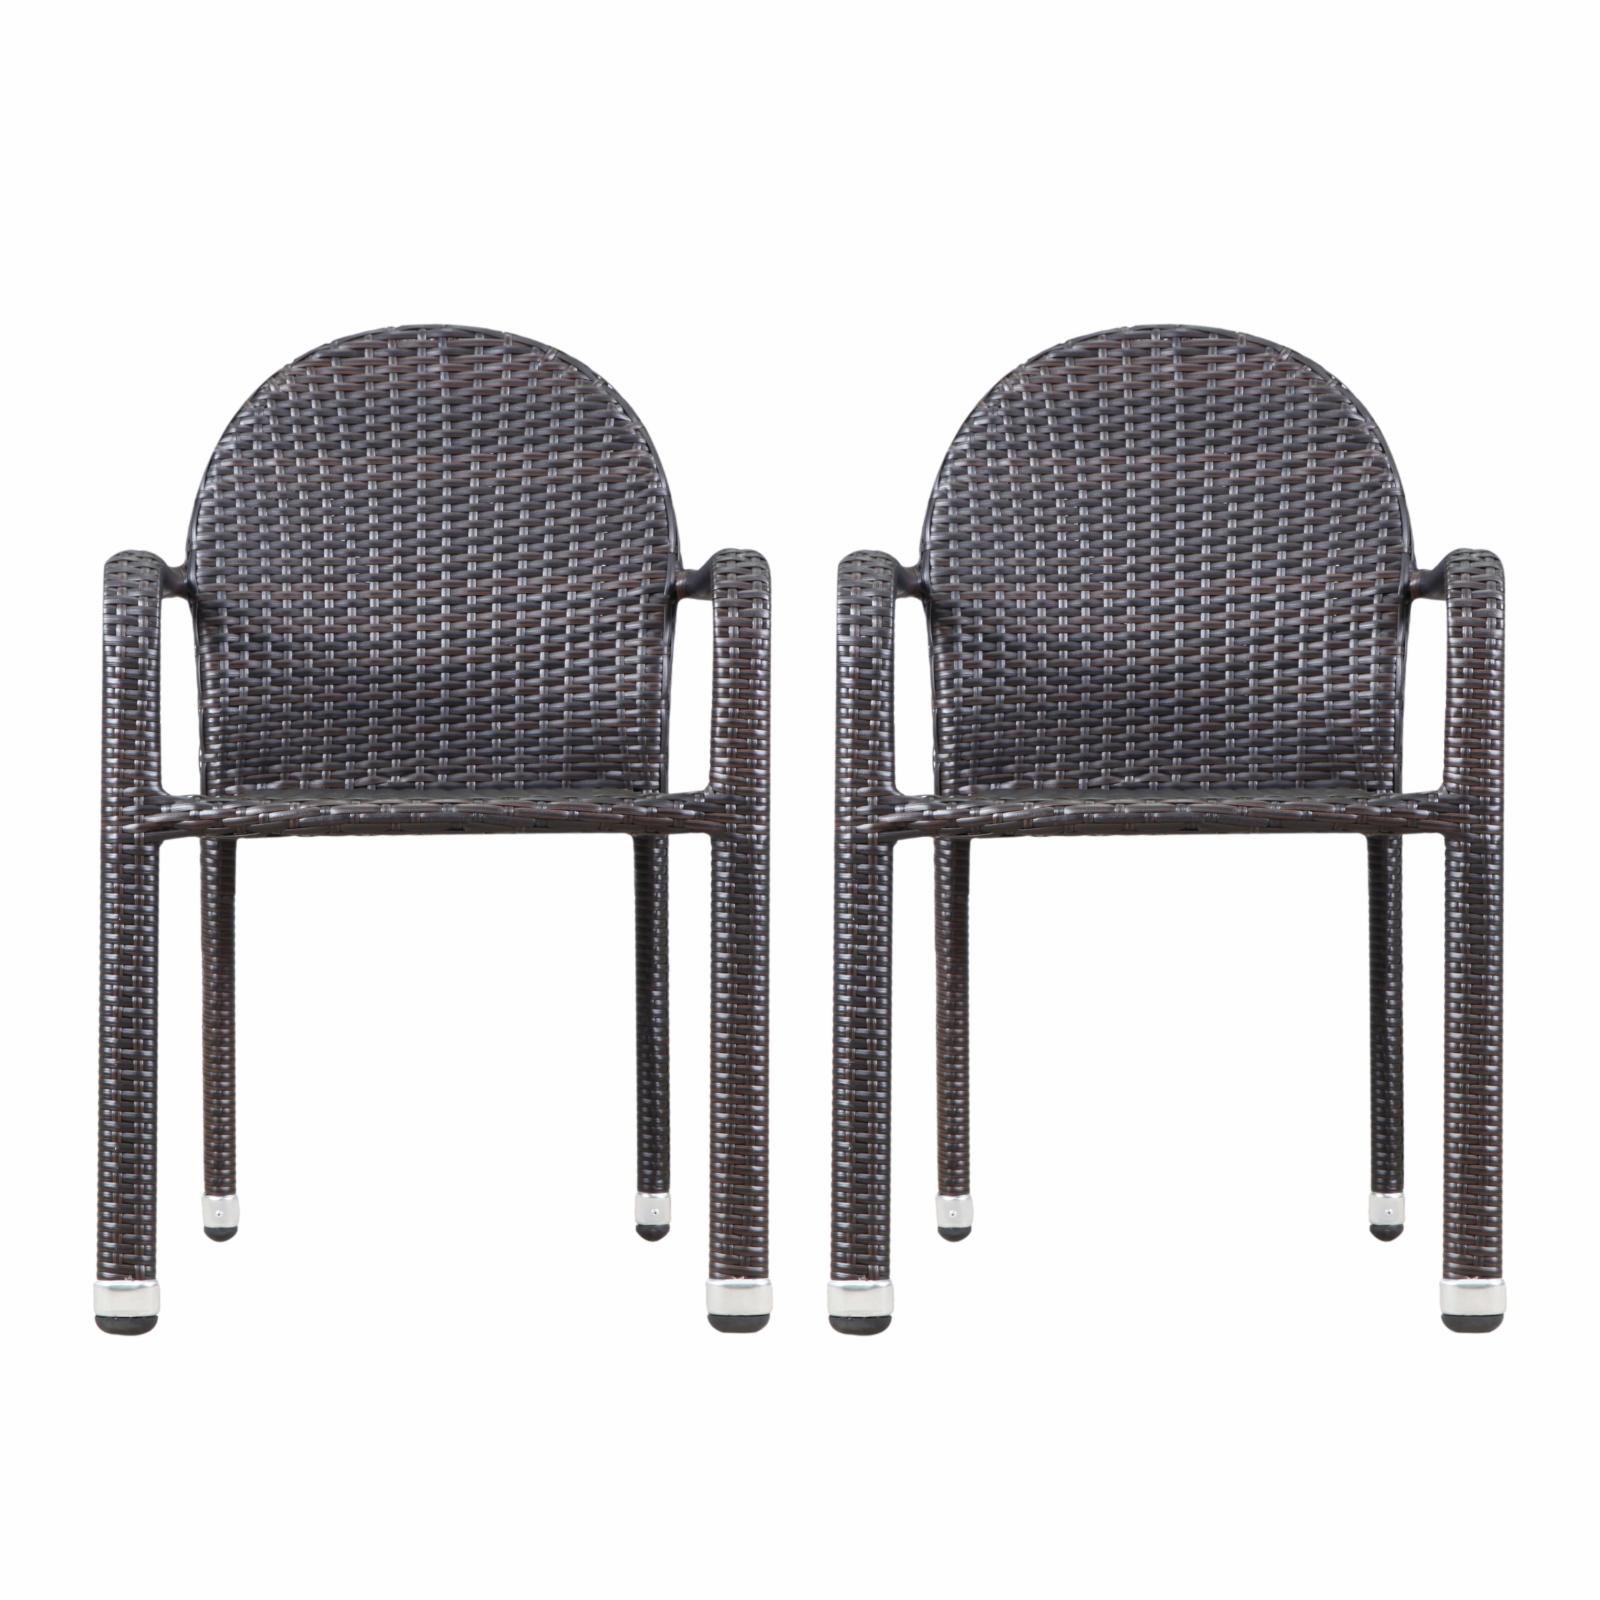 Ariyaan Outdoor Wicker Stacking Dining Chairs - Set of 2 - Multibrown - image 2 of 10